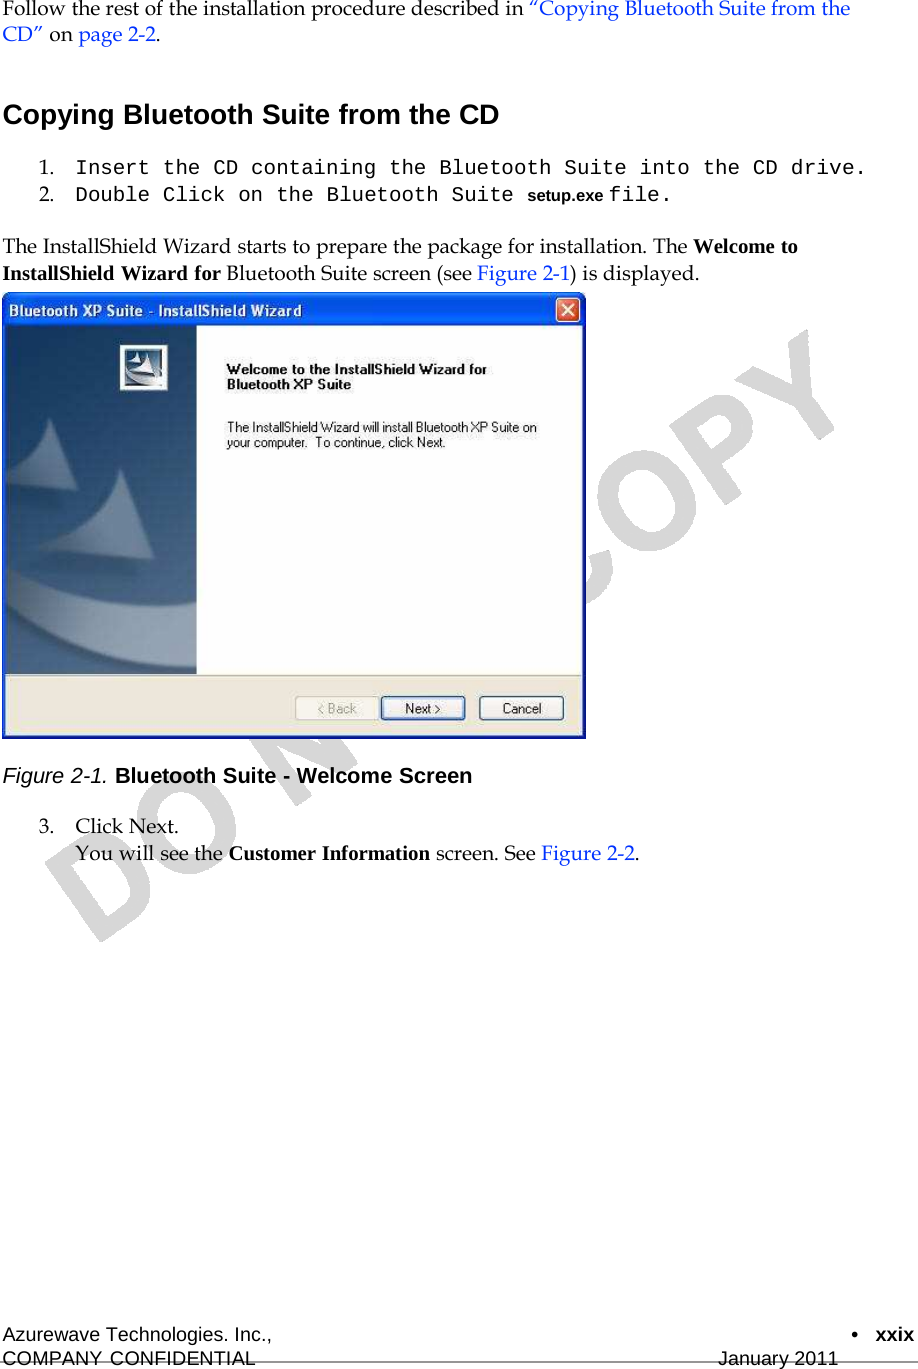  Follow the rest of the installation procedure described in “Copying Bluetooth Suite from the CD” on page 2-2.   Copying Bluetooth Suite from the CD  1.    Insert the CD containing the Bluetooth Suite into the CD drive. 2.    Double Click on the Bluetooth Suite setup.exe file.  The InstallShield Wizard starts to prepare the package for installation. The Welcome to InstallShield Wizard for Bluetooth Suite screen (see Figure 2-1) is displayed.                        Figure 2-1. Bluetooth Suite - Welcome Screen  3.    Click Next. You will see the Customer Information screen. See Figure 2-2.                       Azurewave Technologies. Inc.,  •   xxix COMPANY CONFIDENTIAL   January 2011 